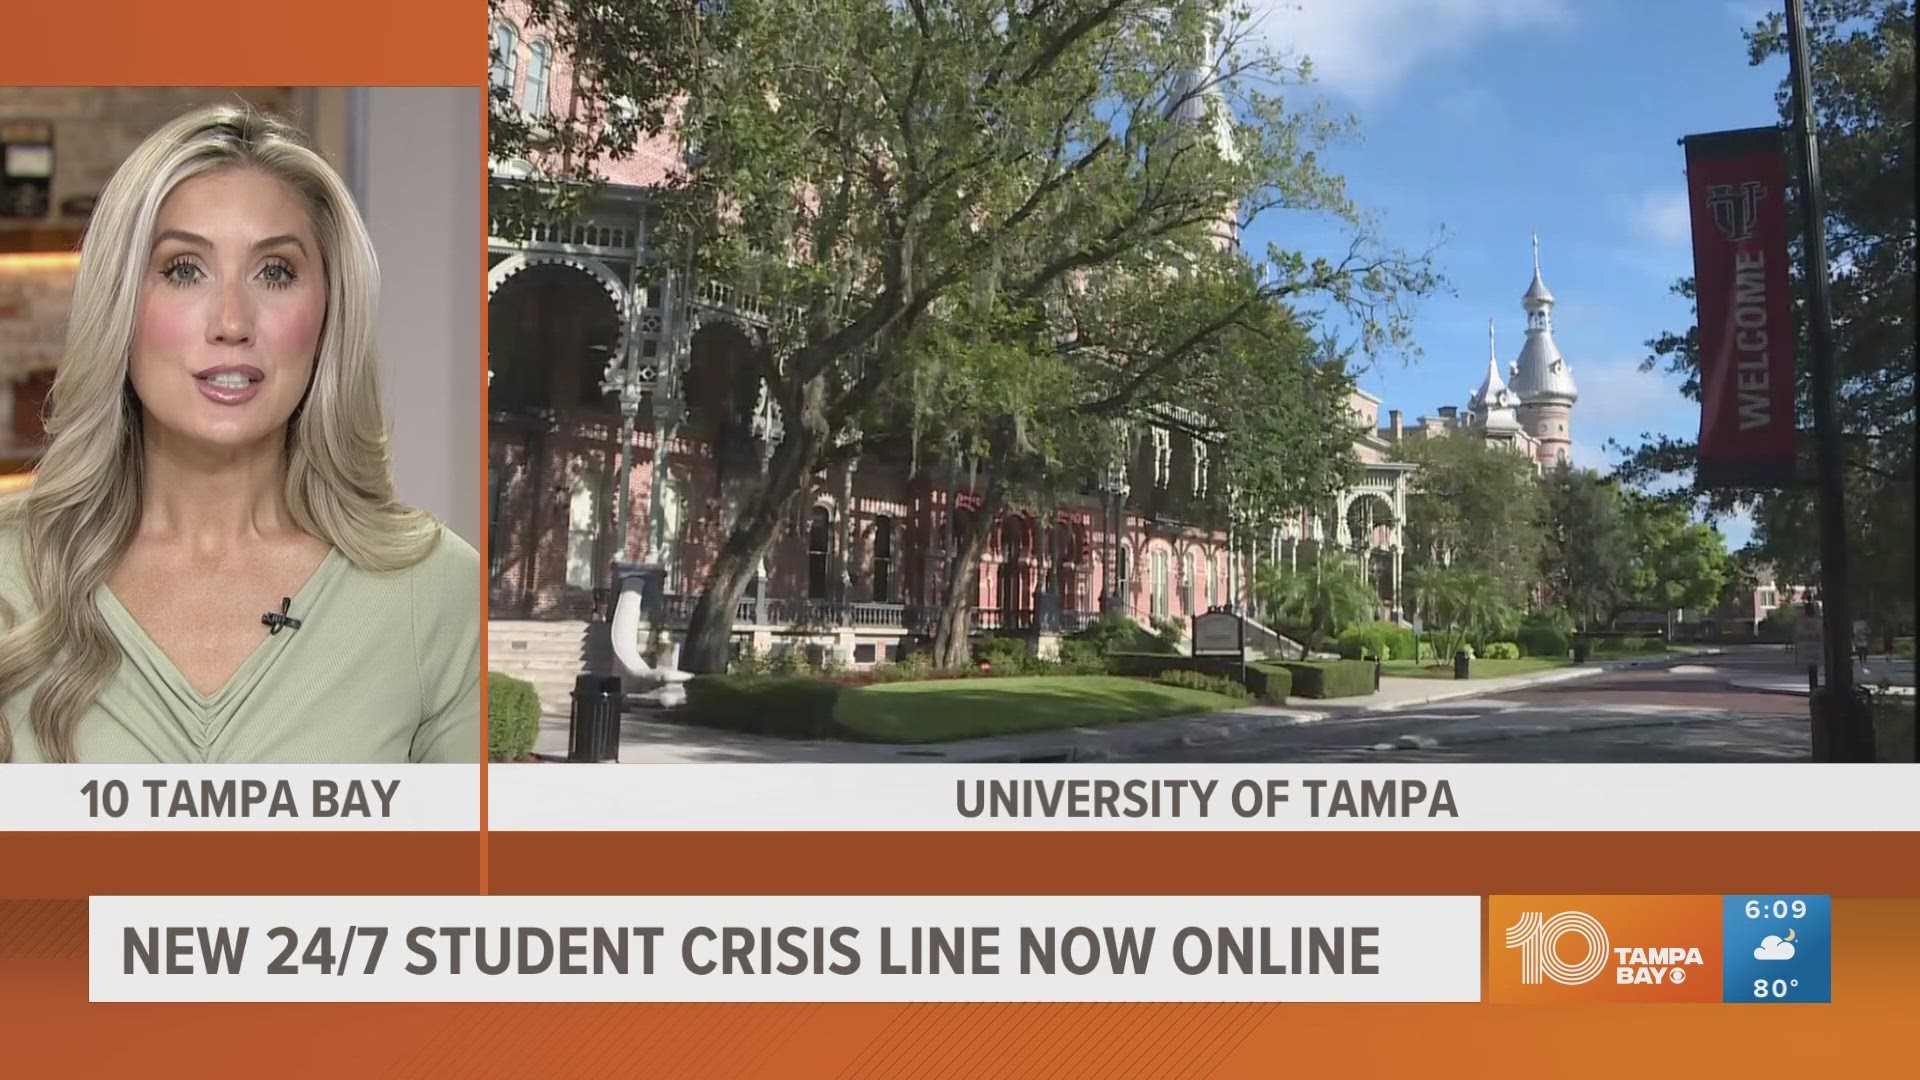 UT says it has partnered with Christie Campus Health to provide an all-hours support line from licensed clinicians to all undergrad and graduate students.